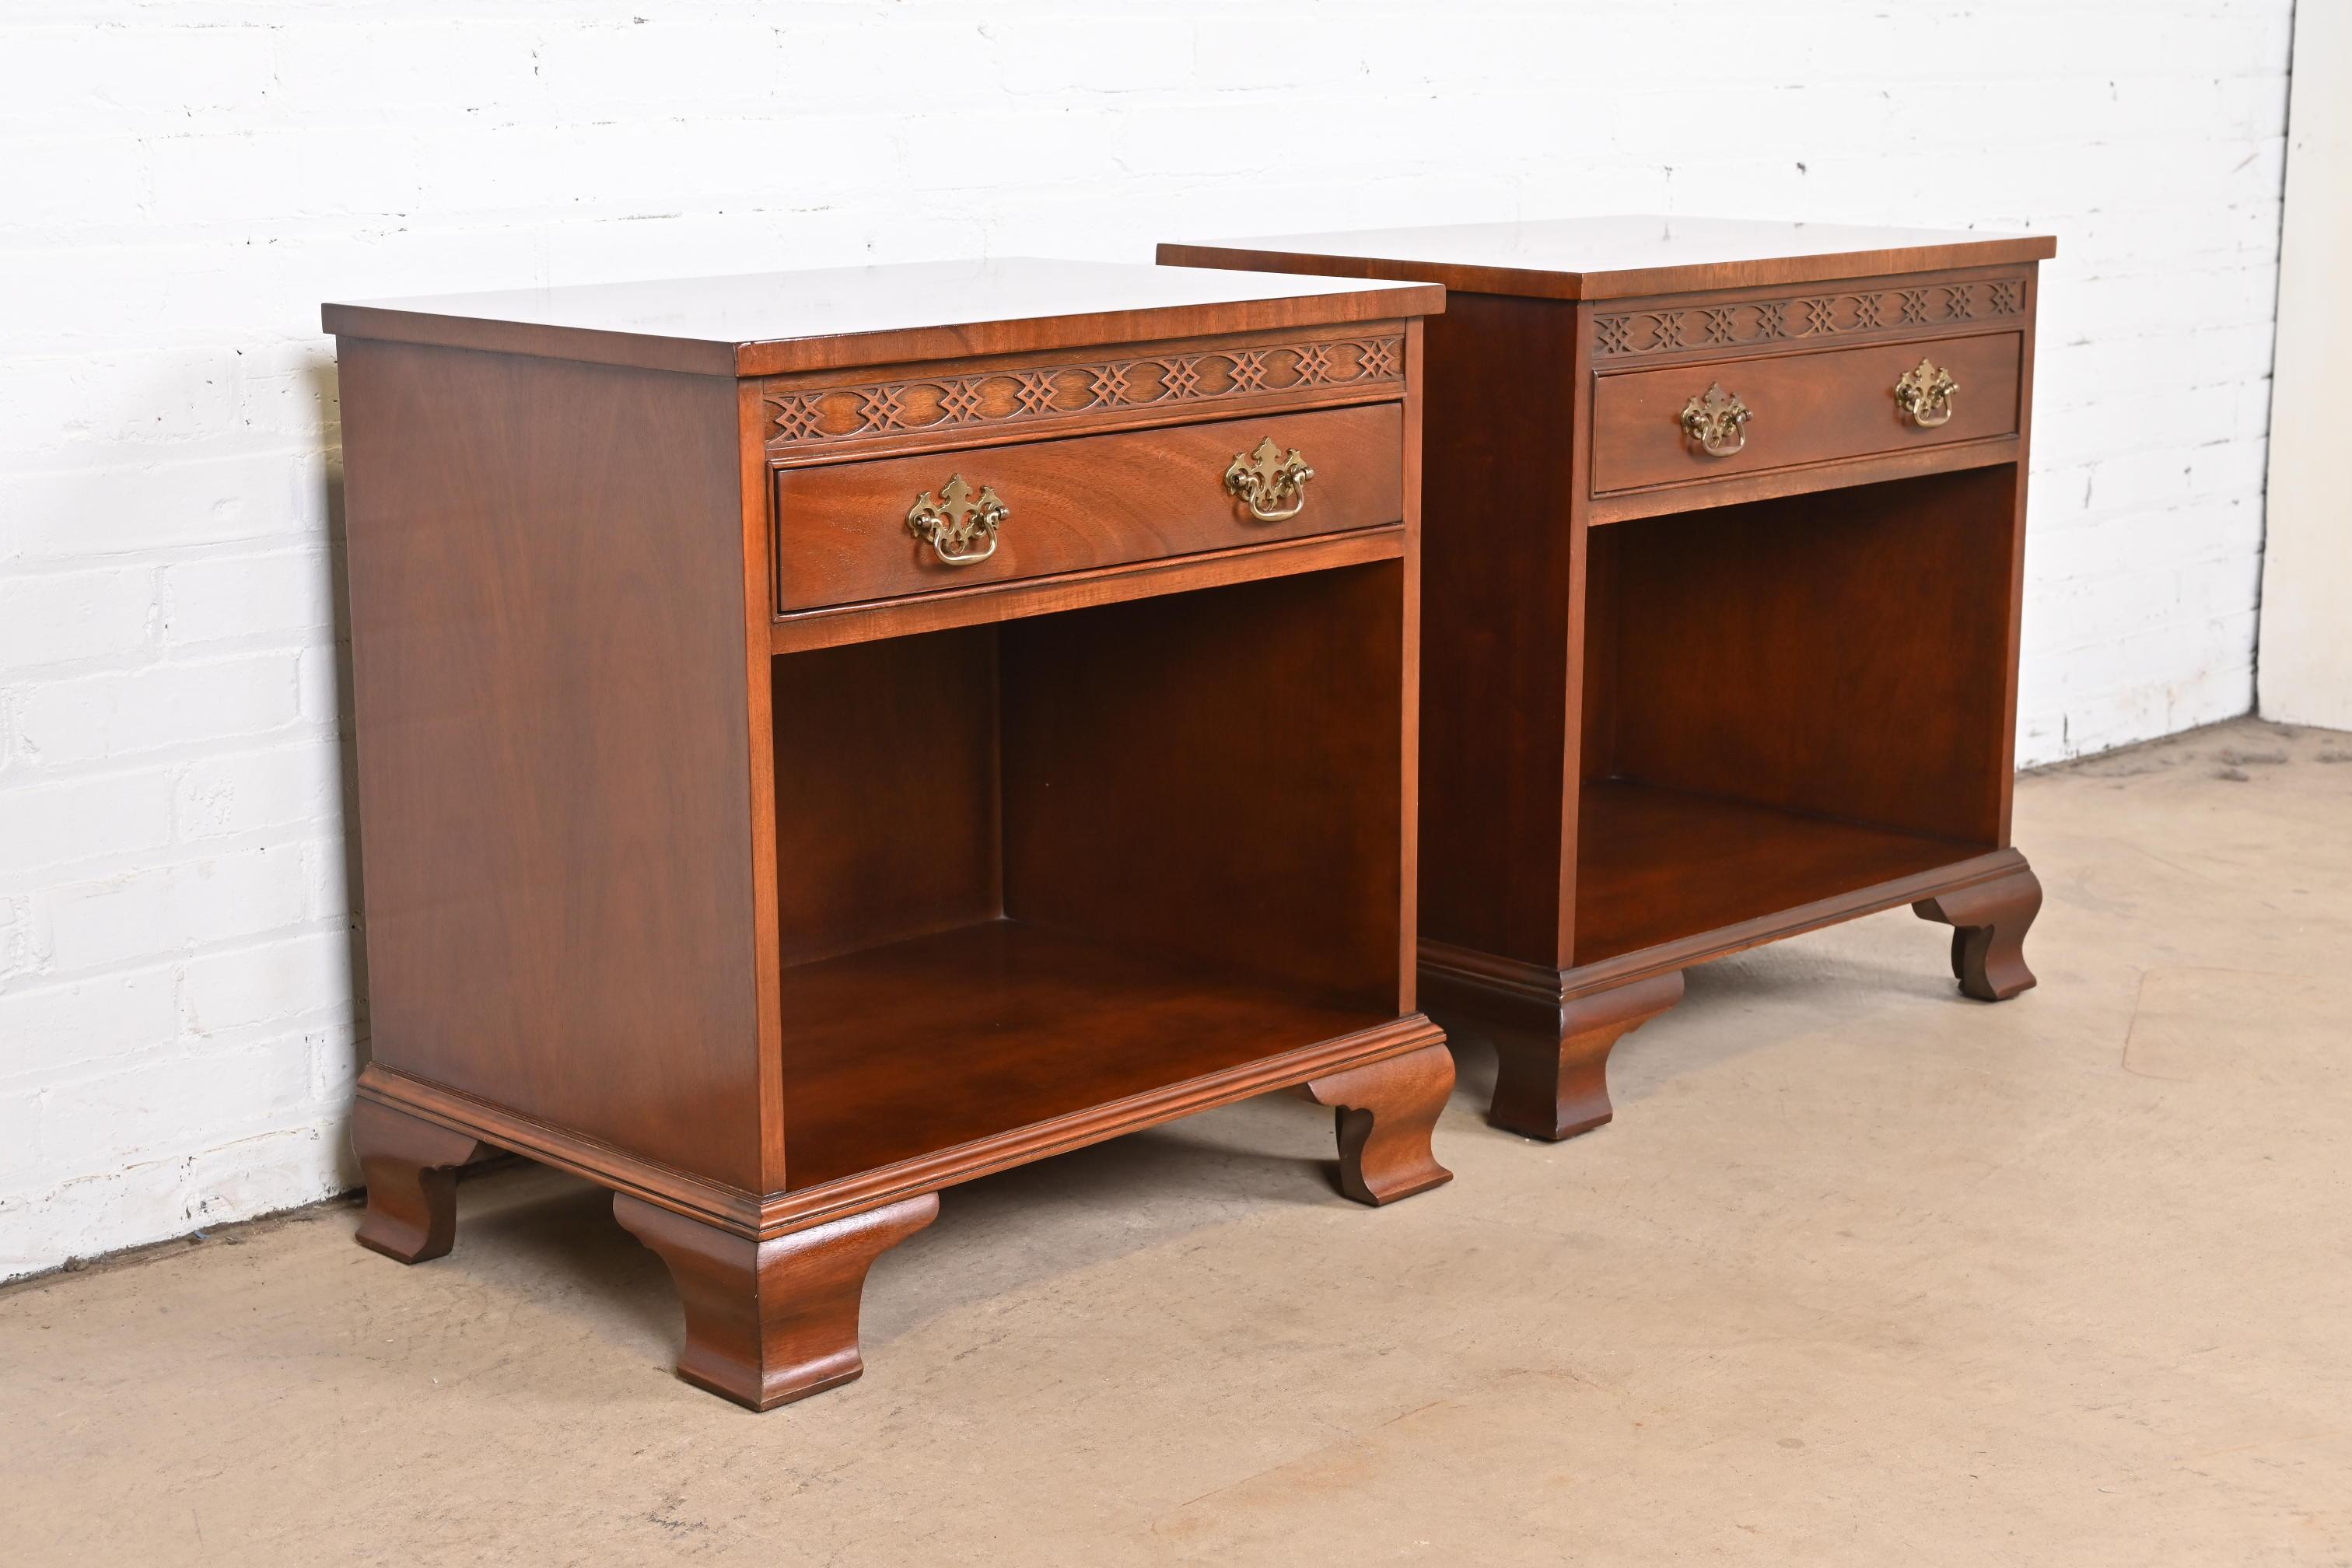 Baker Furniture English Chippendale Carved Mahogany Nightstands, Pair In Good Condition For Sale In South Bend, IN